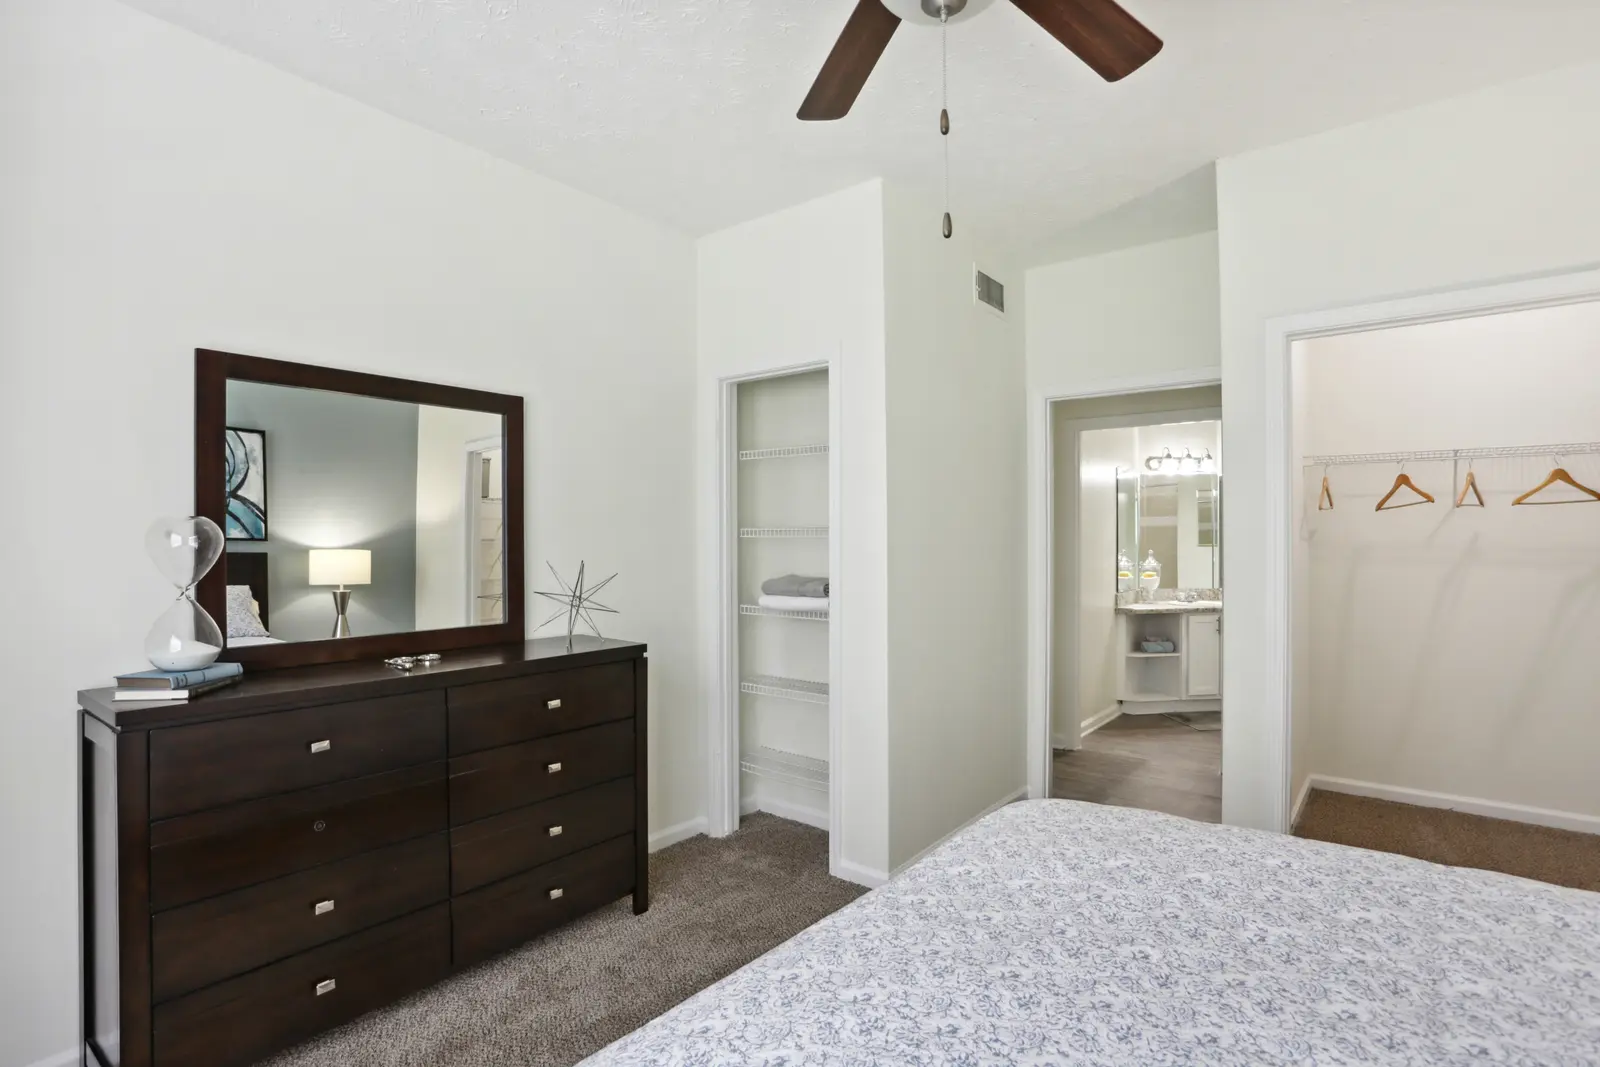 Carpeted bedroom with walk-in closet and linen closet